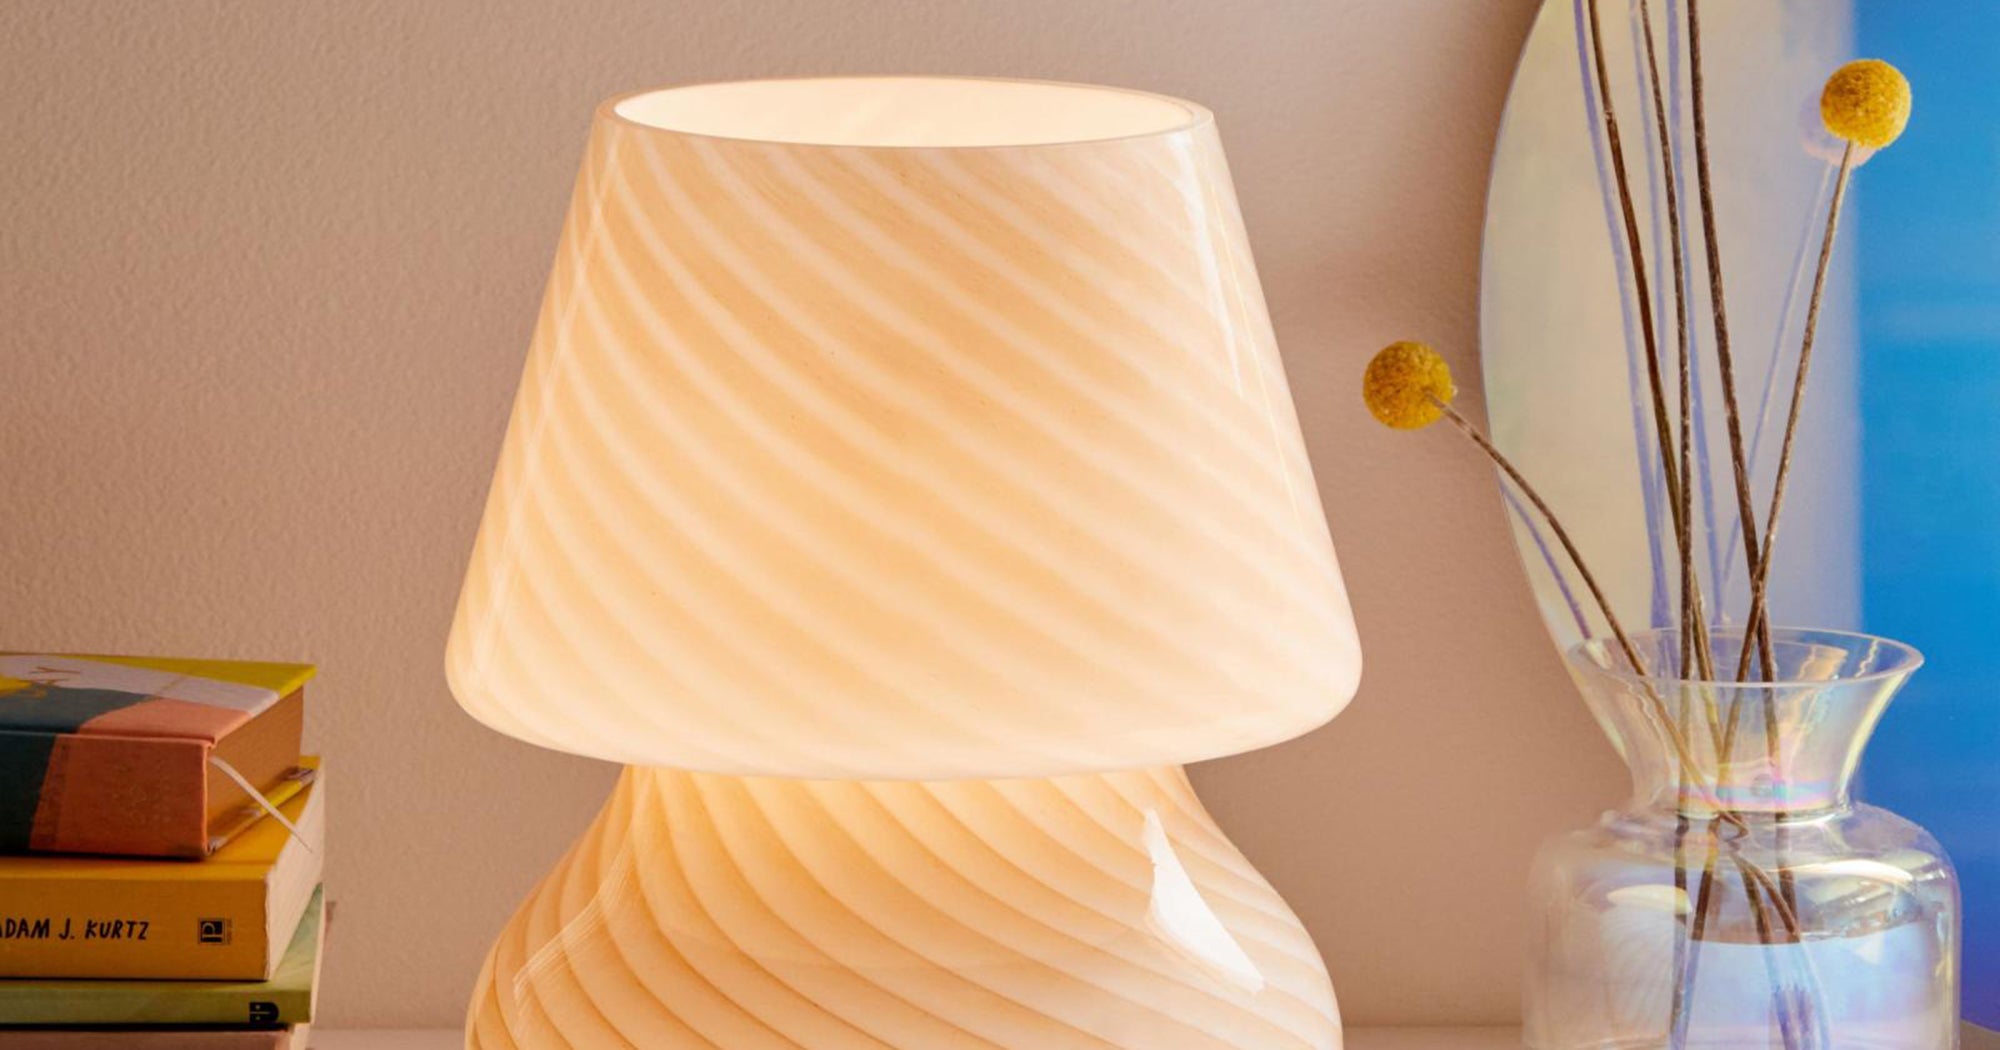 Mushroom Lamp Trend - The 12 Best Styles You'll Love